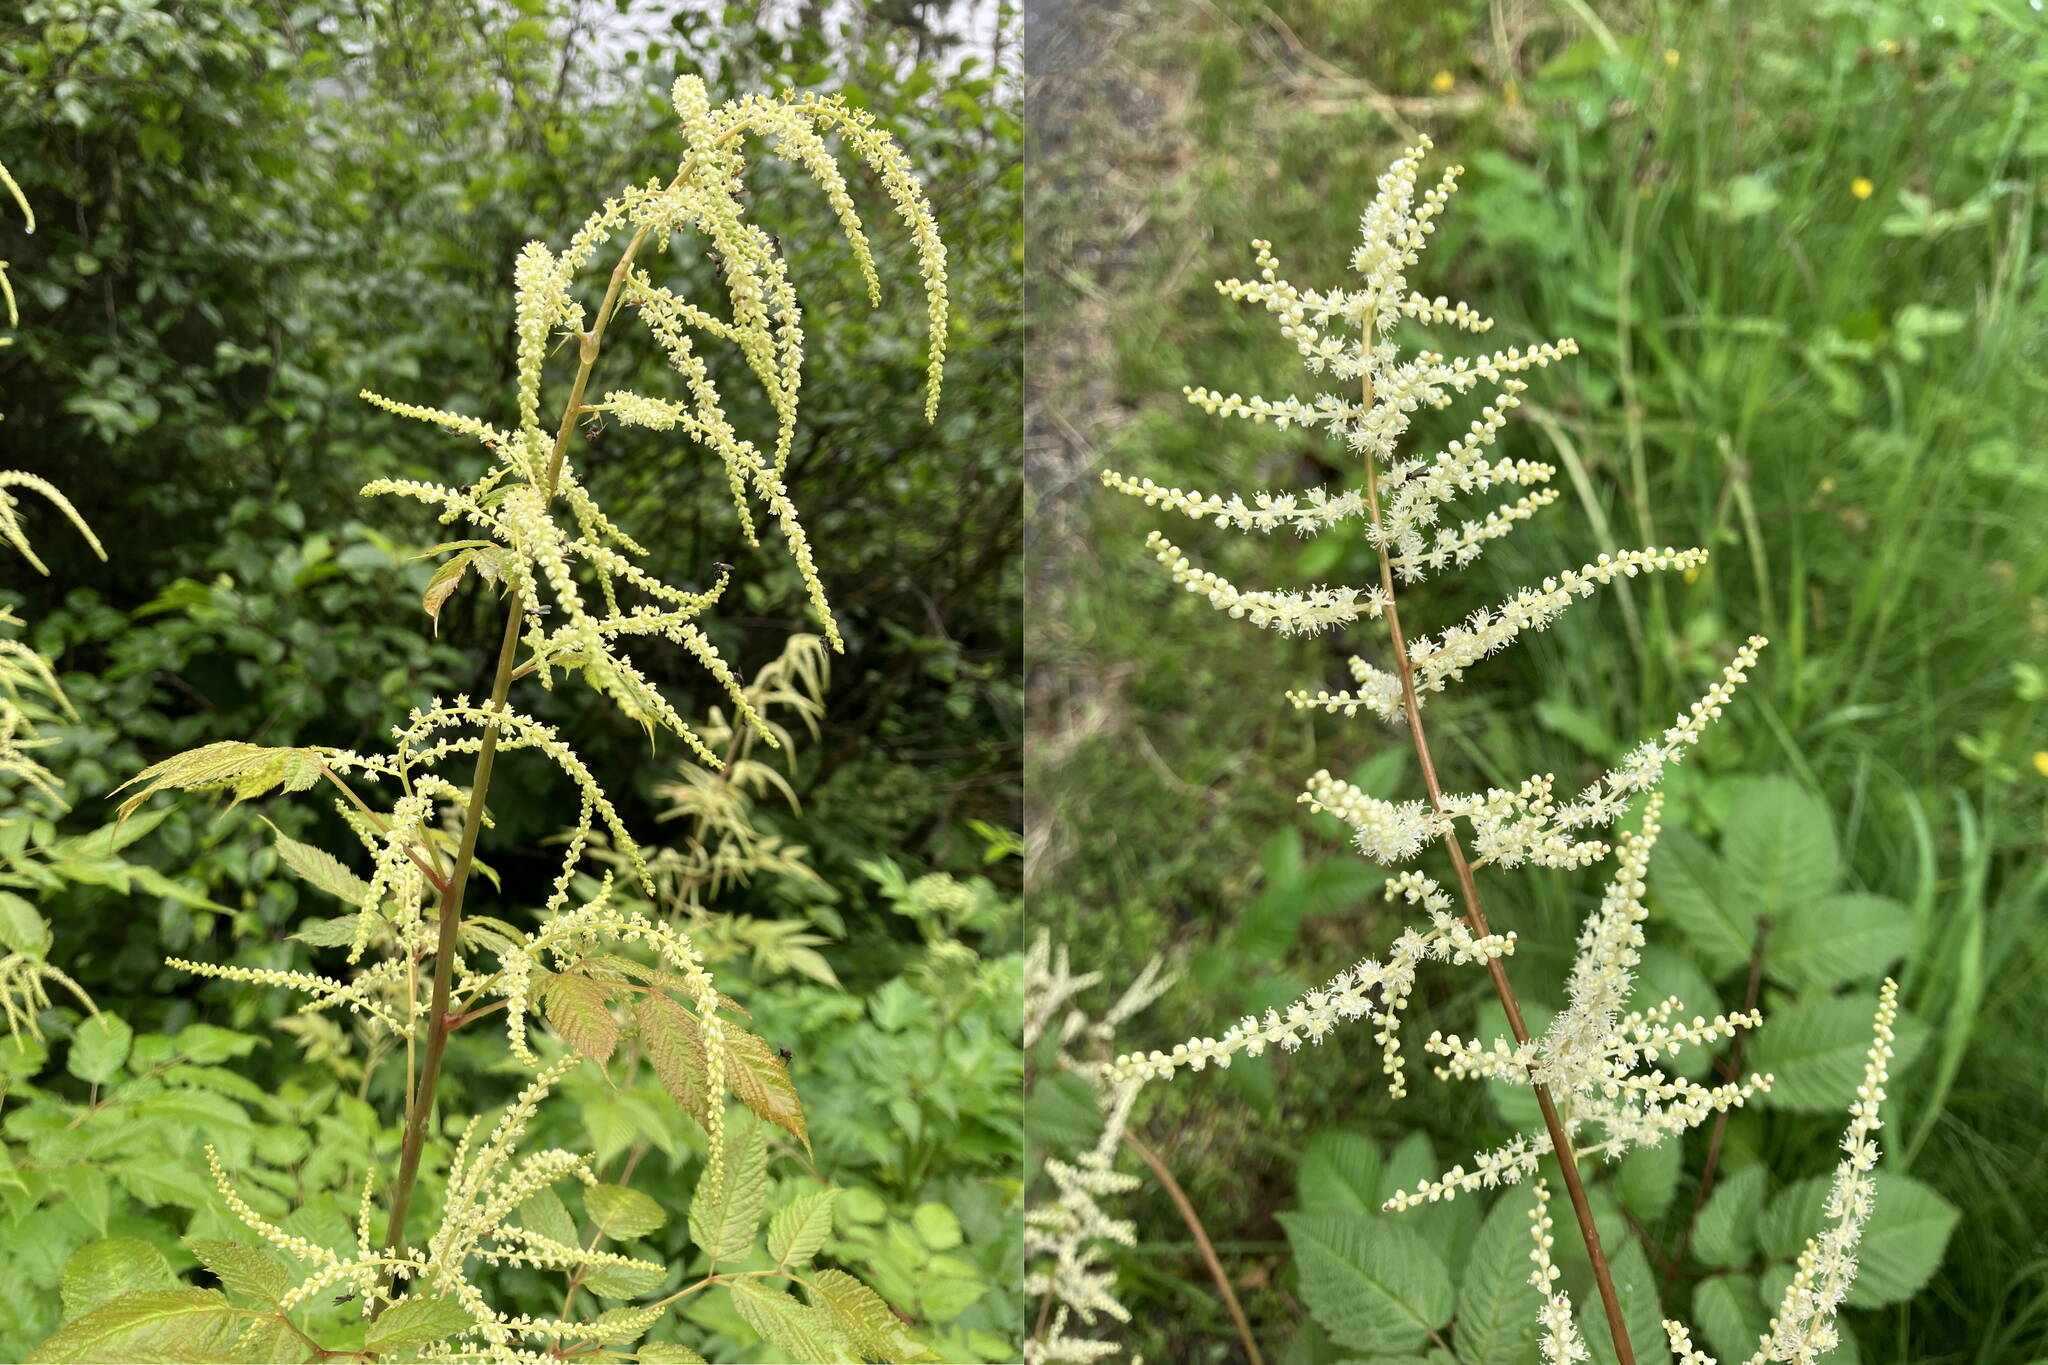 Photos by Mary F. Willson
Female goatsbeard flowers, left, are less conspicuous, so the inflorescence is less decorative. Male goatsbeard flowers, right, have visible stamens and slightly larger petals than females, making the inflorescence showy.